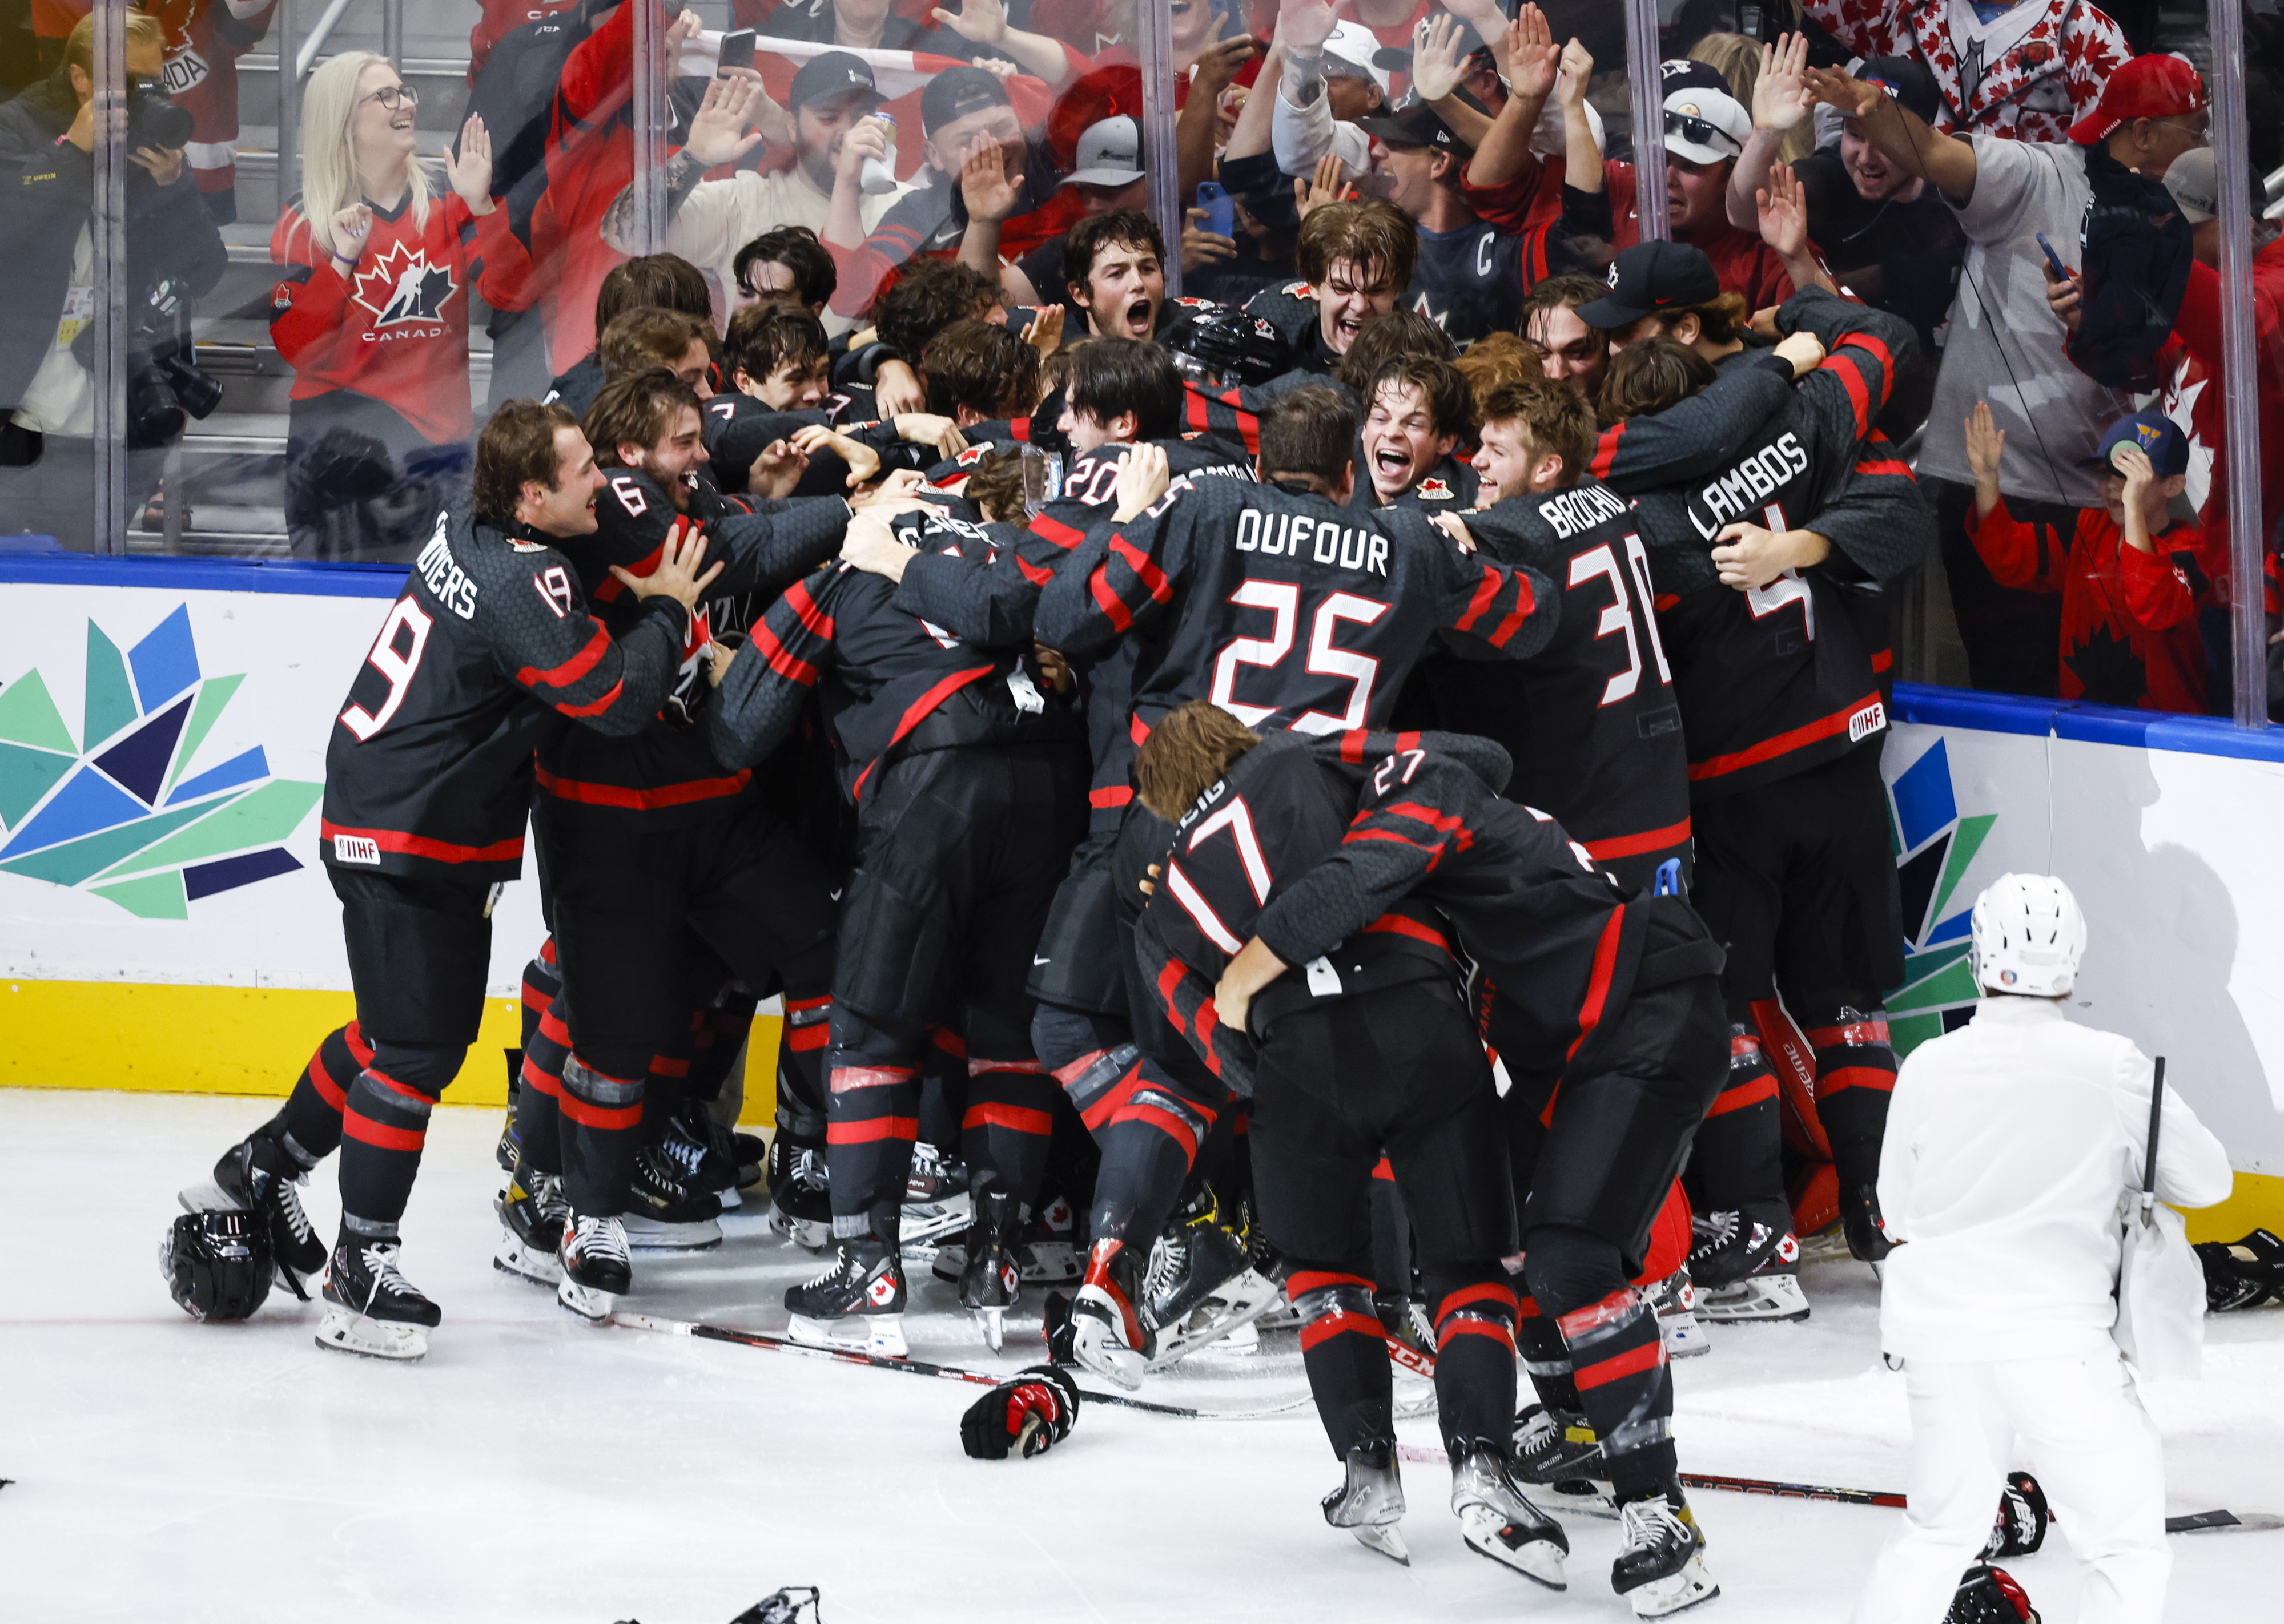 Overtime goal (with assist from a Stars prospect) wins junior hockey gold for Team Canada